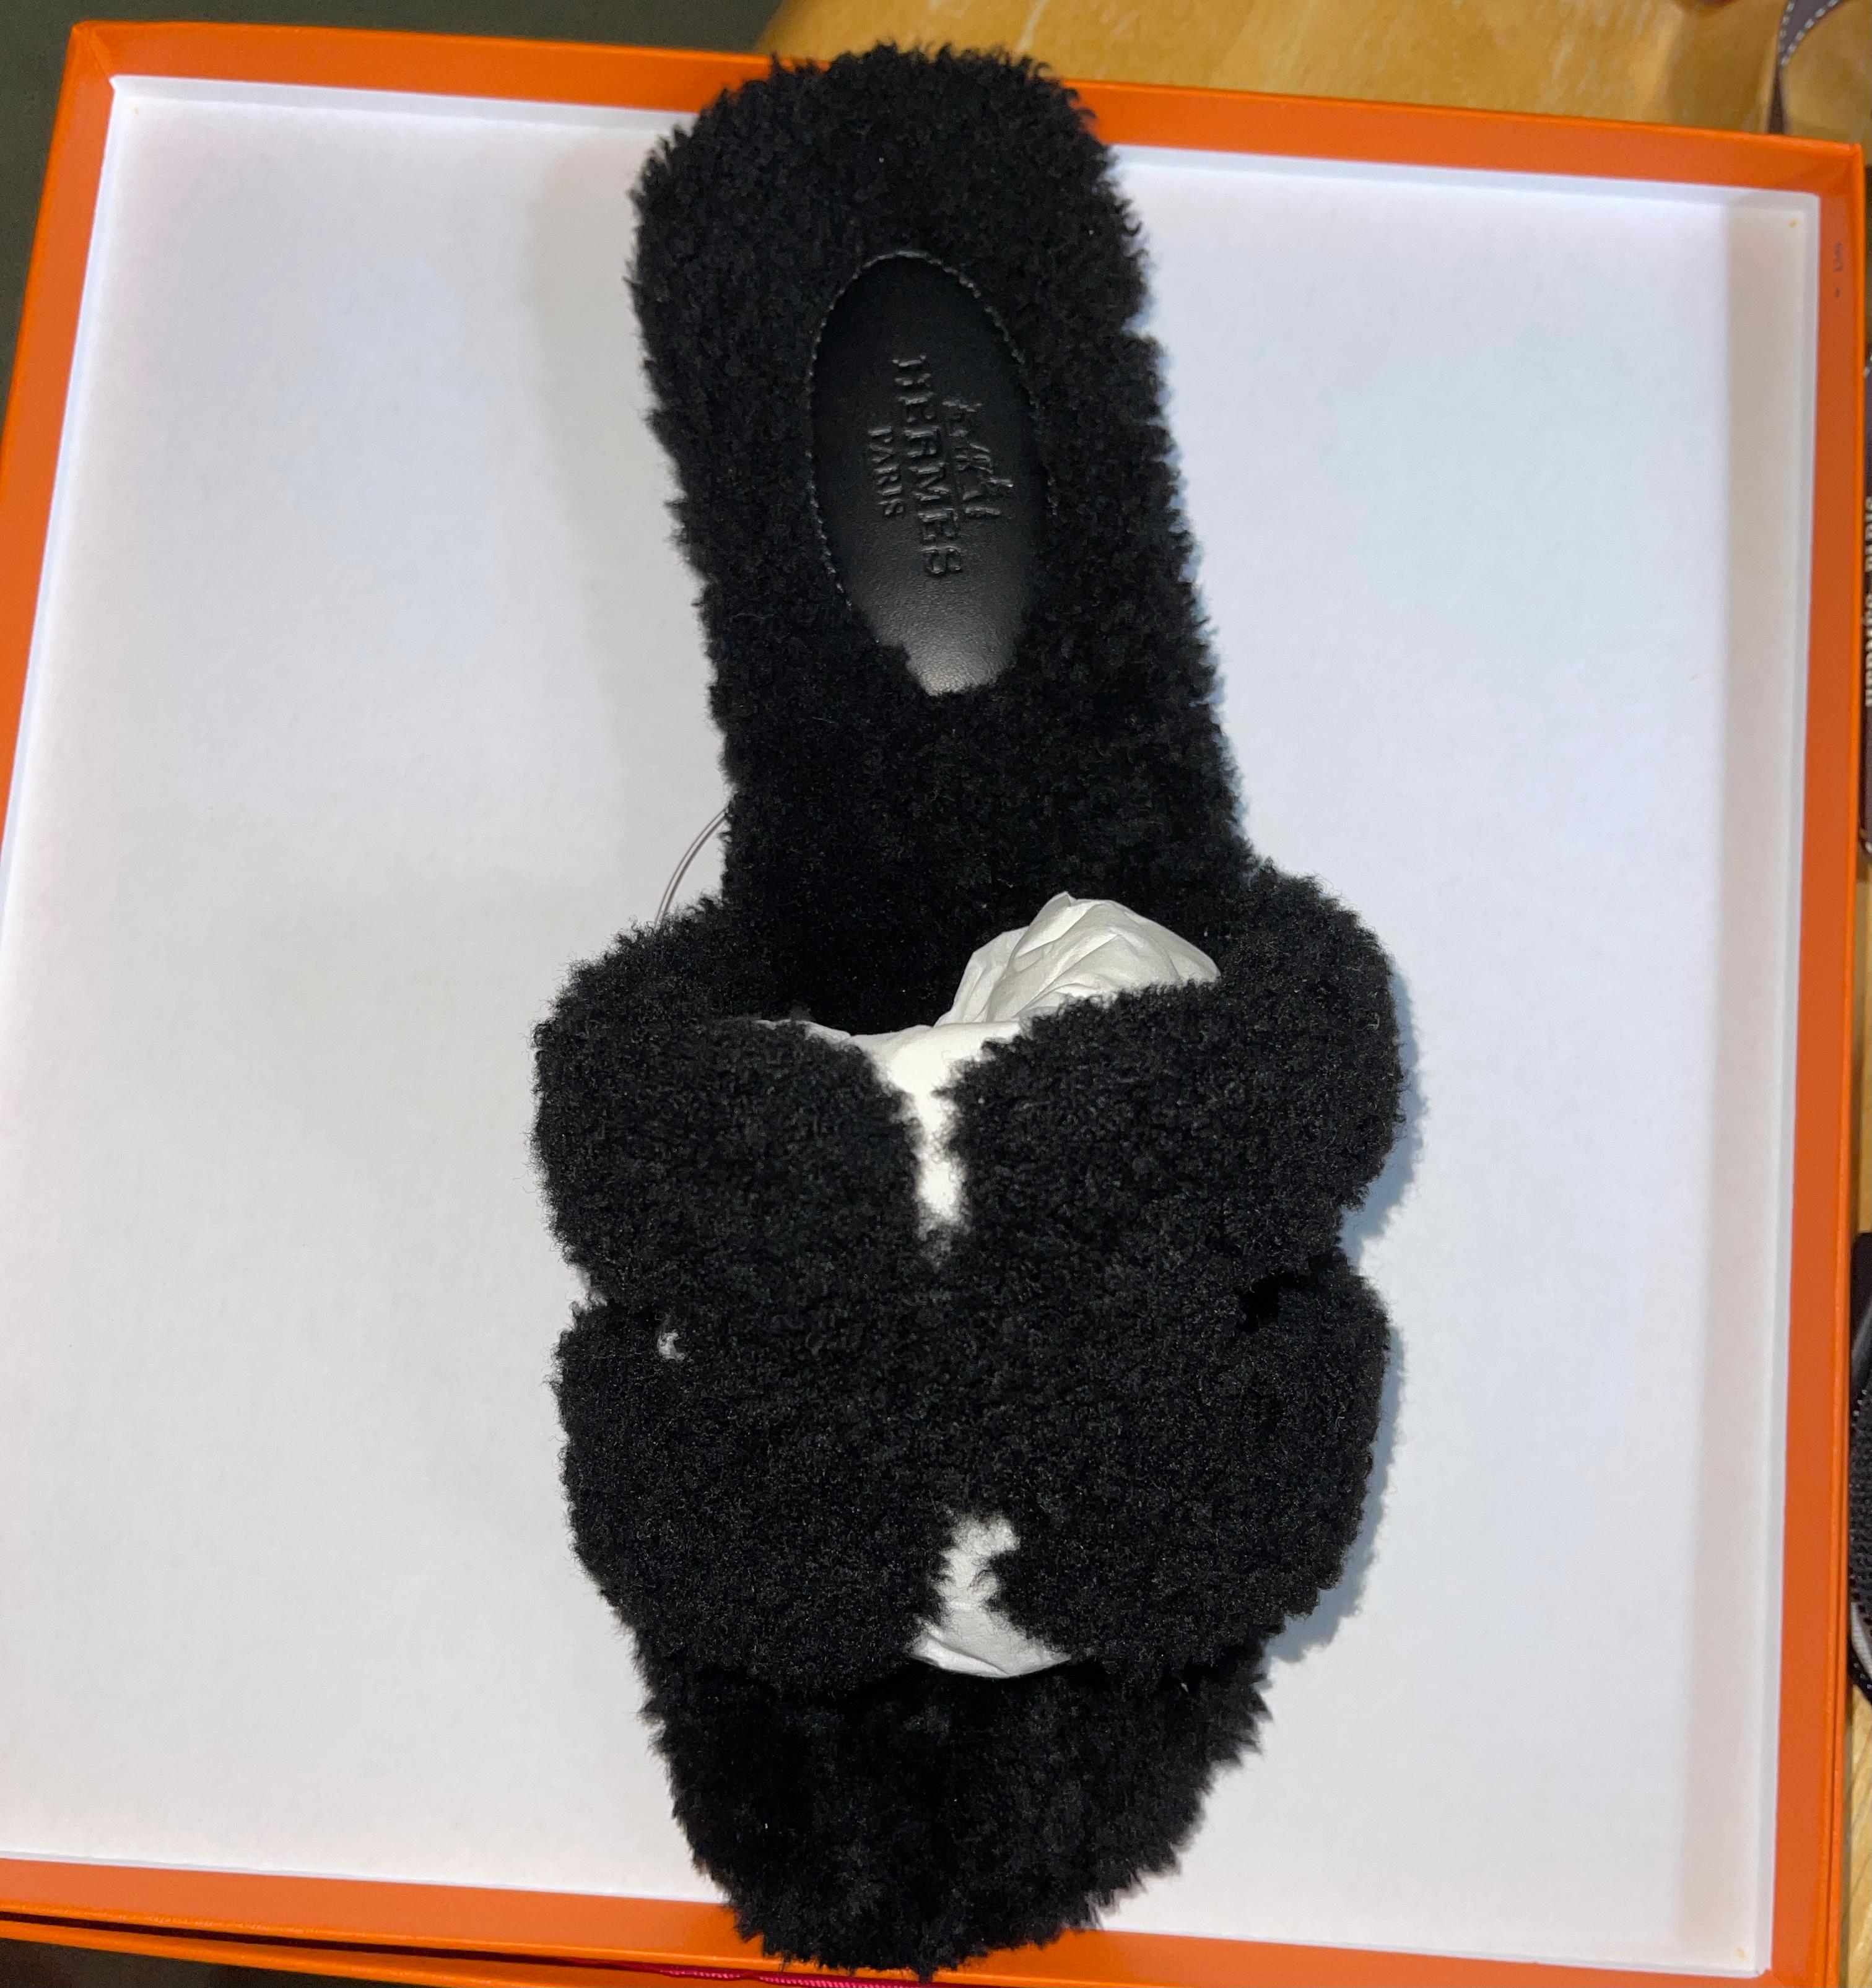 The  Oran Sandal Slipper
So soft and comfy
SOLDOUT
Black
SIZE 36
 Sandal in woolskin with iconic 